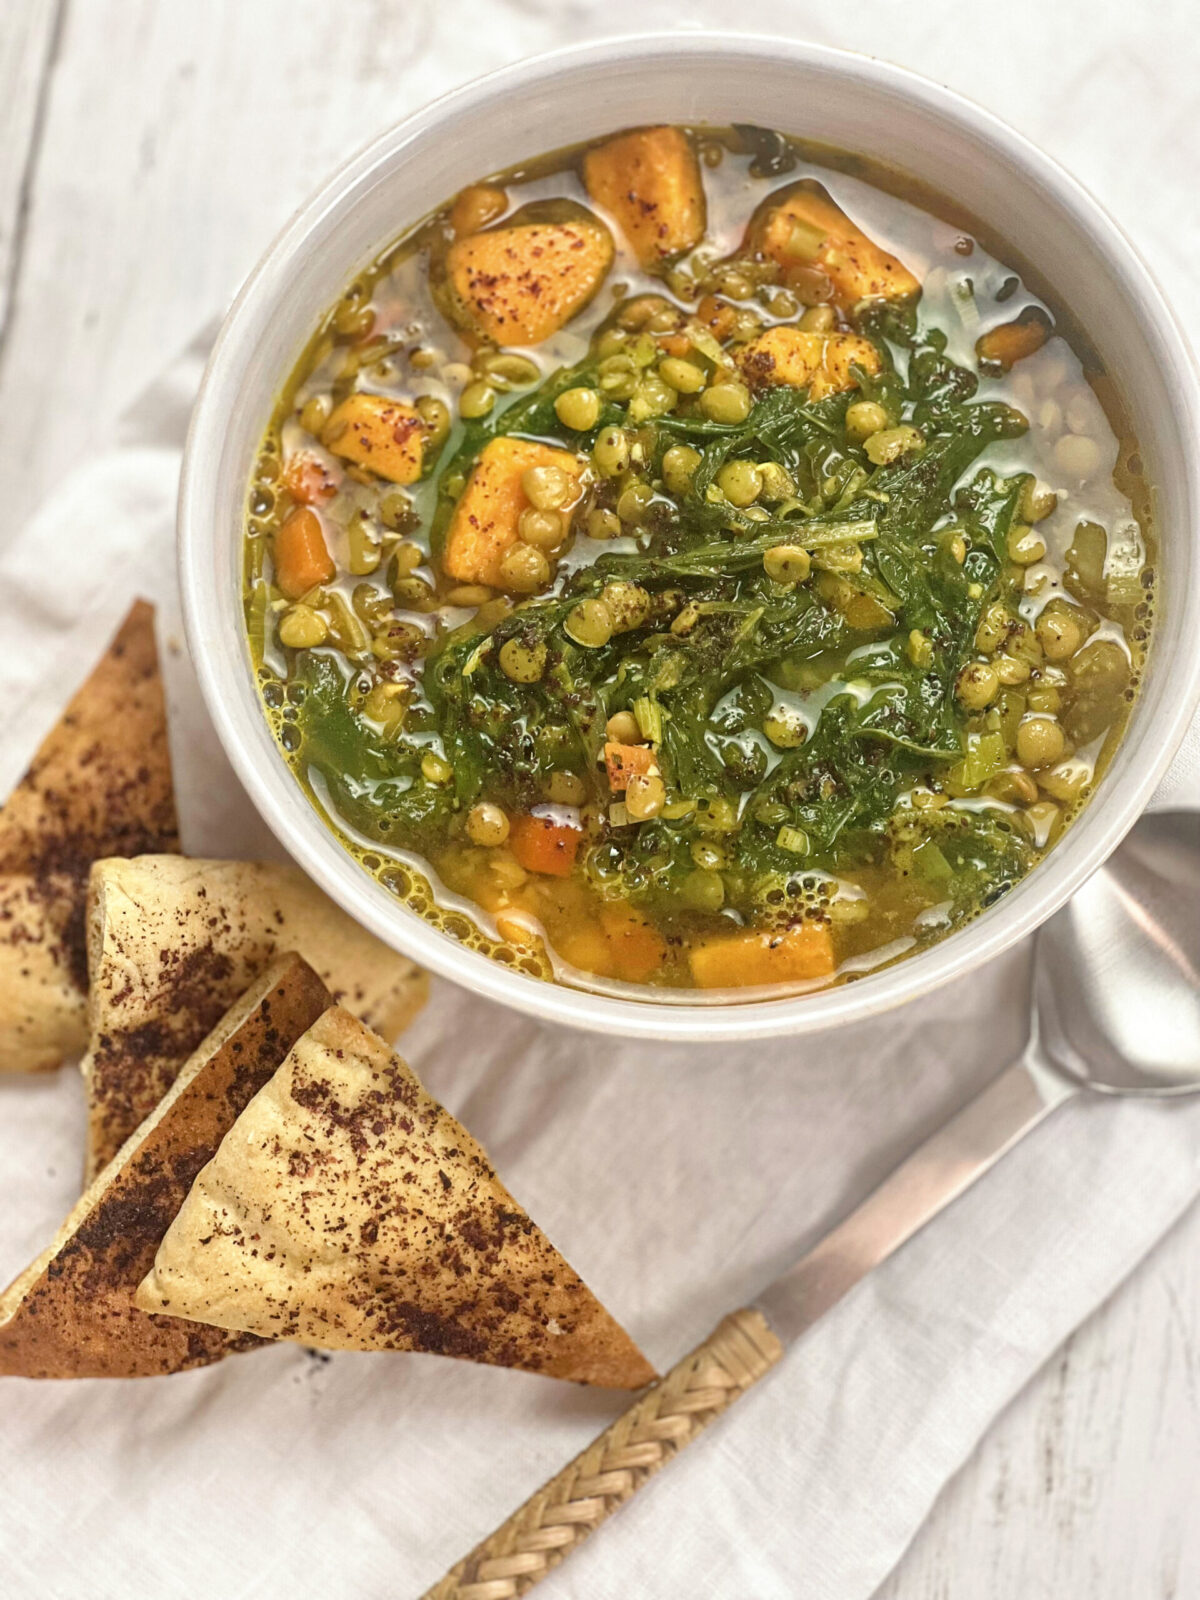 Bowl of Lentil Soup with Kale and Sweet Potatoes, accompanied by sliced pita bread.